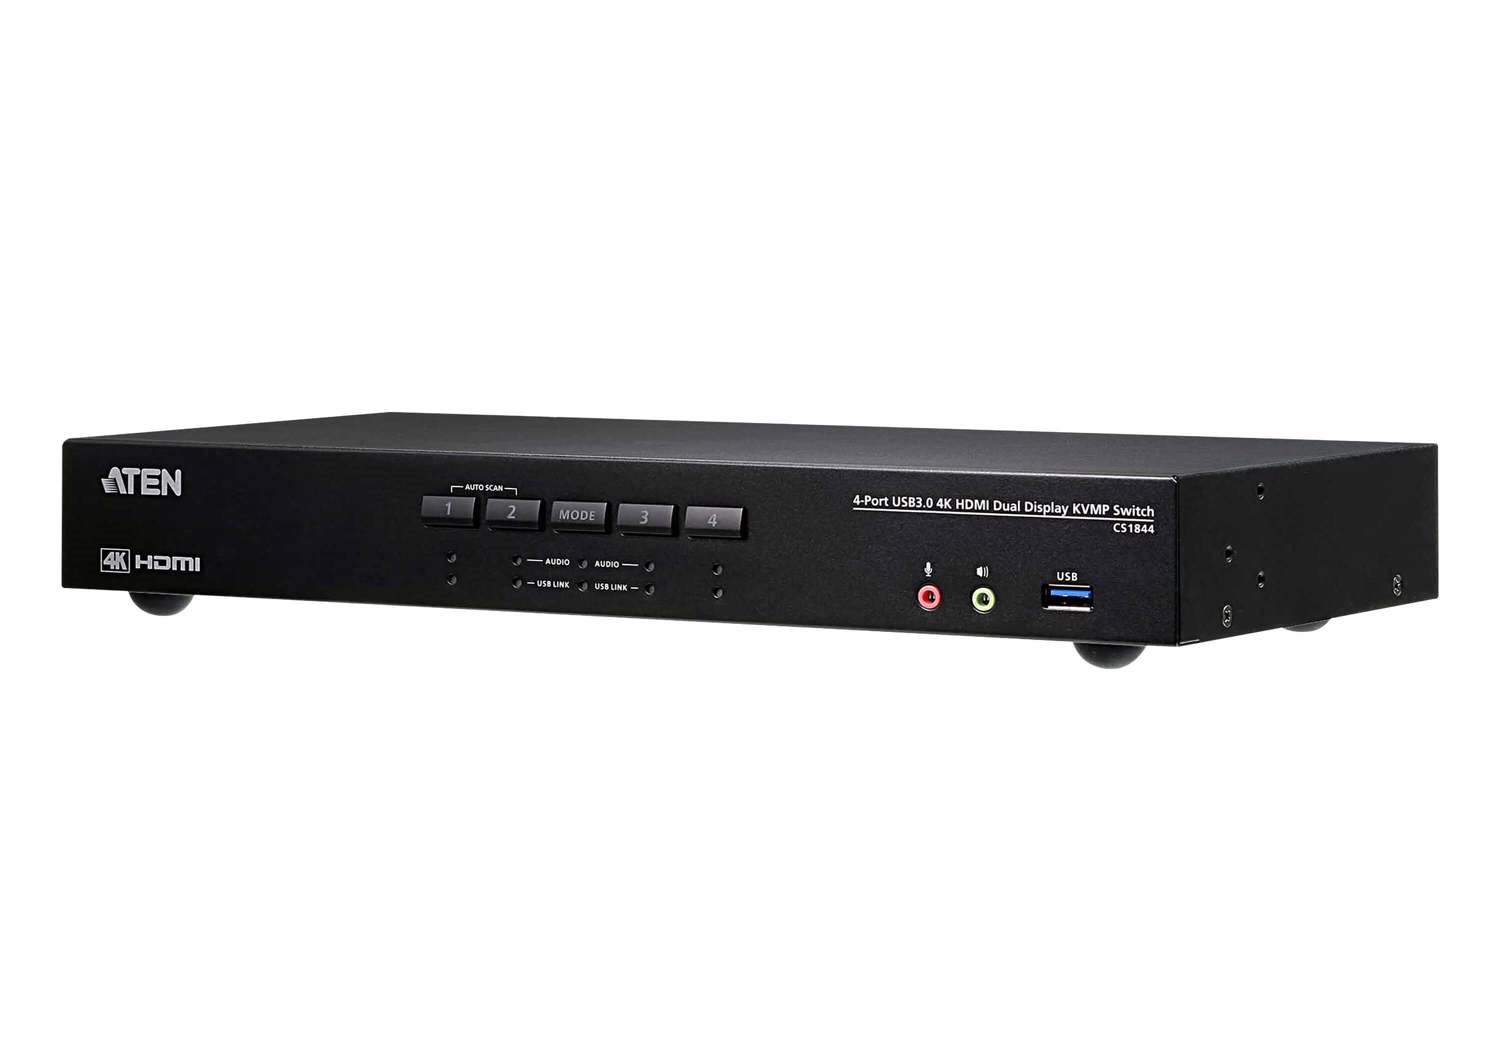 Aten 4 Port Usb 3.0 4K 60Hz Dual Hdmi KVMP Switch, Video DynaSync, Switching Via RS232, Hotkeys, Pushbuttons And Mouse, Supports Up To 4096 X 2160